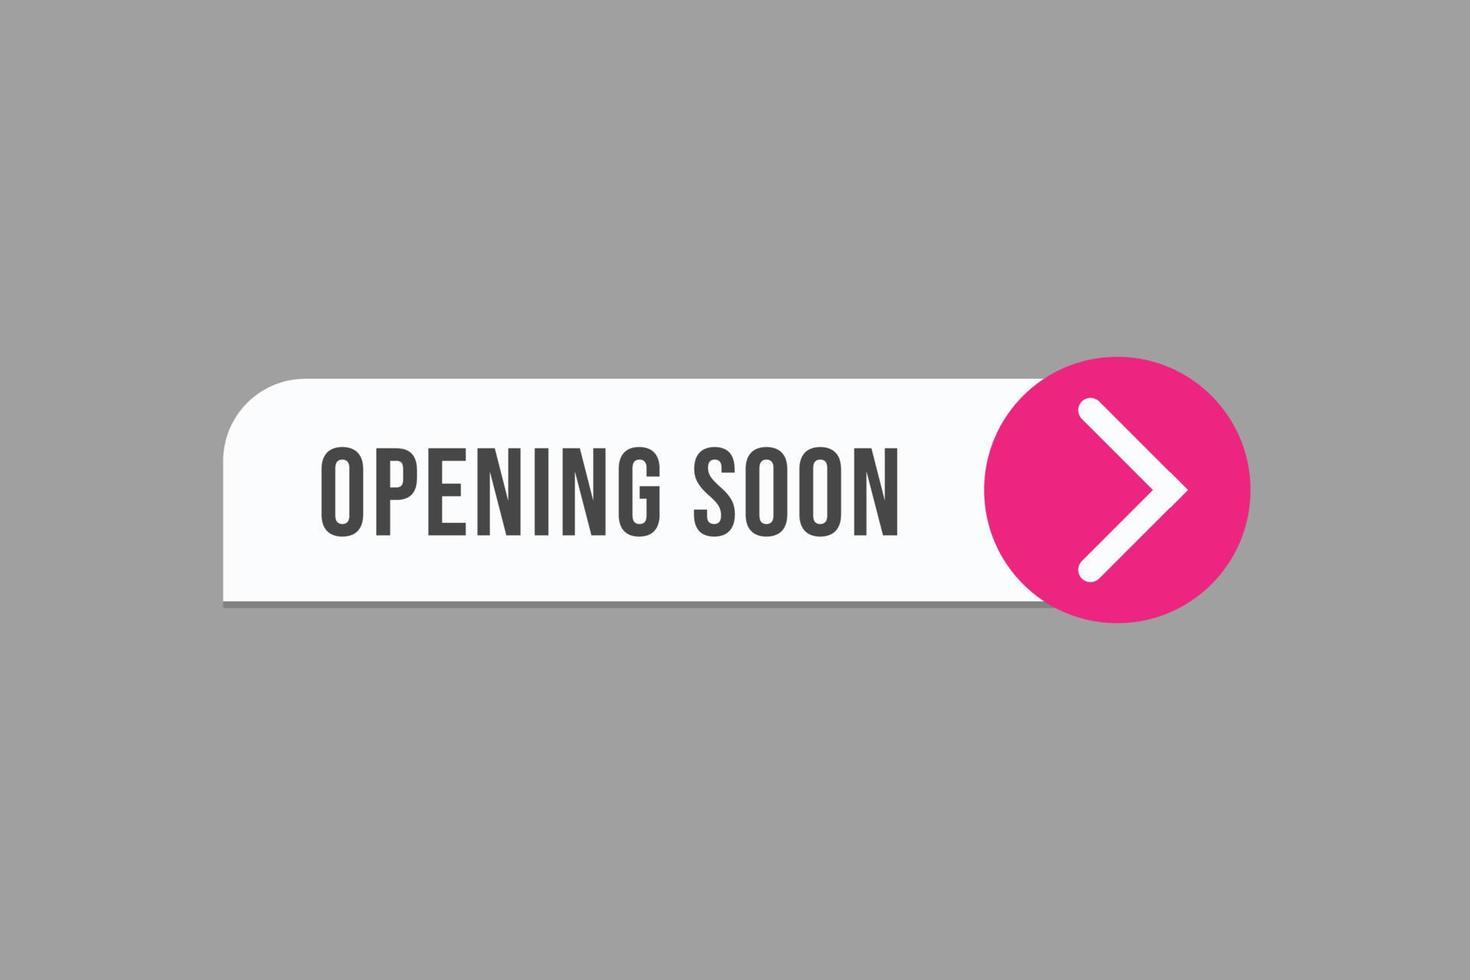 opening soon button vectors.sign label speech bubble opening soon vector